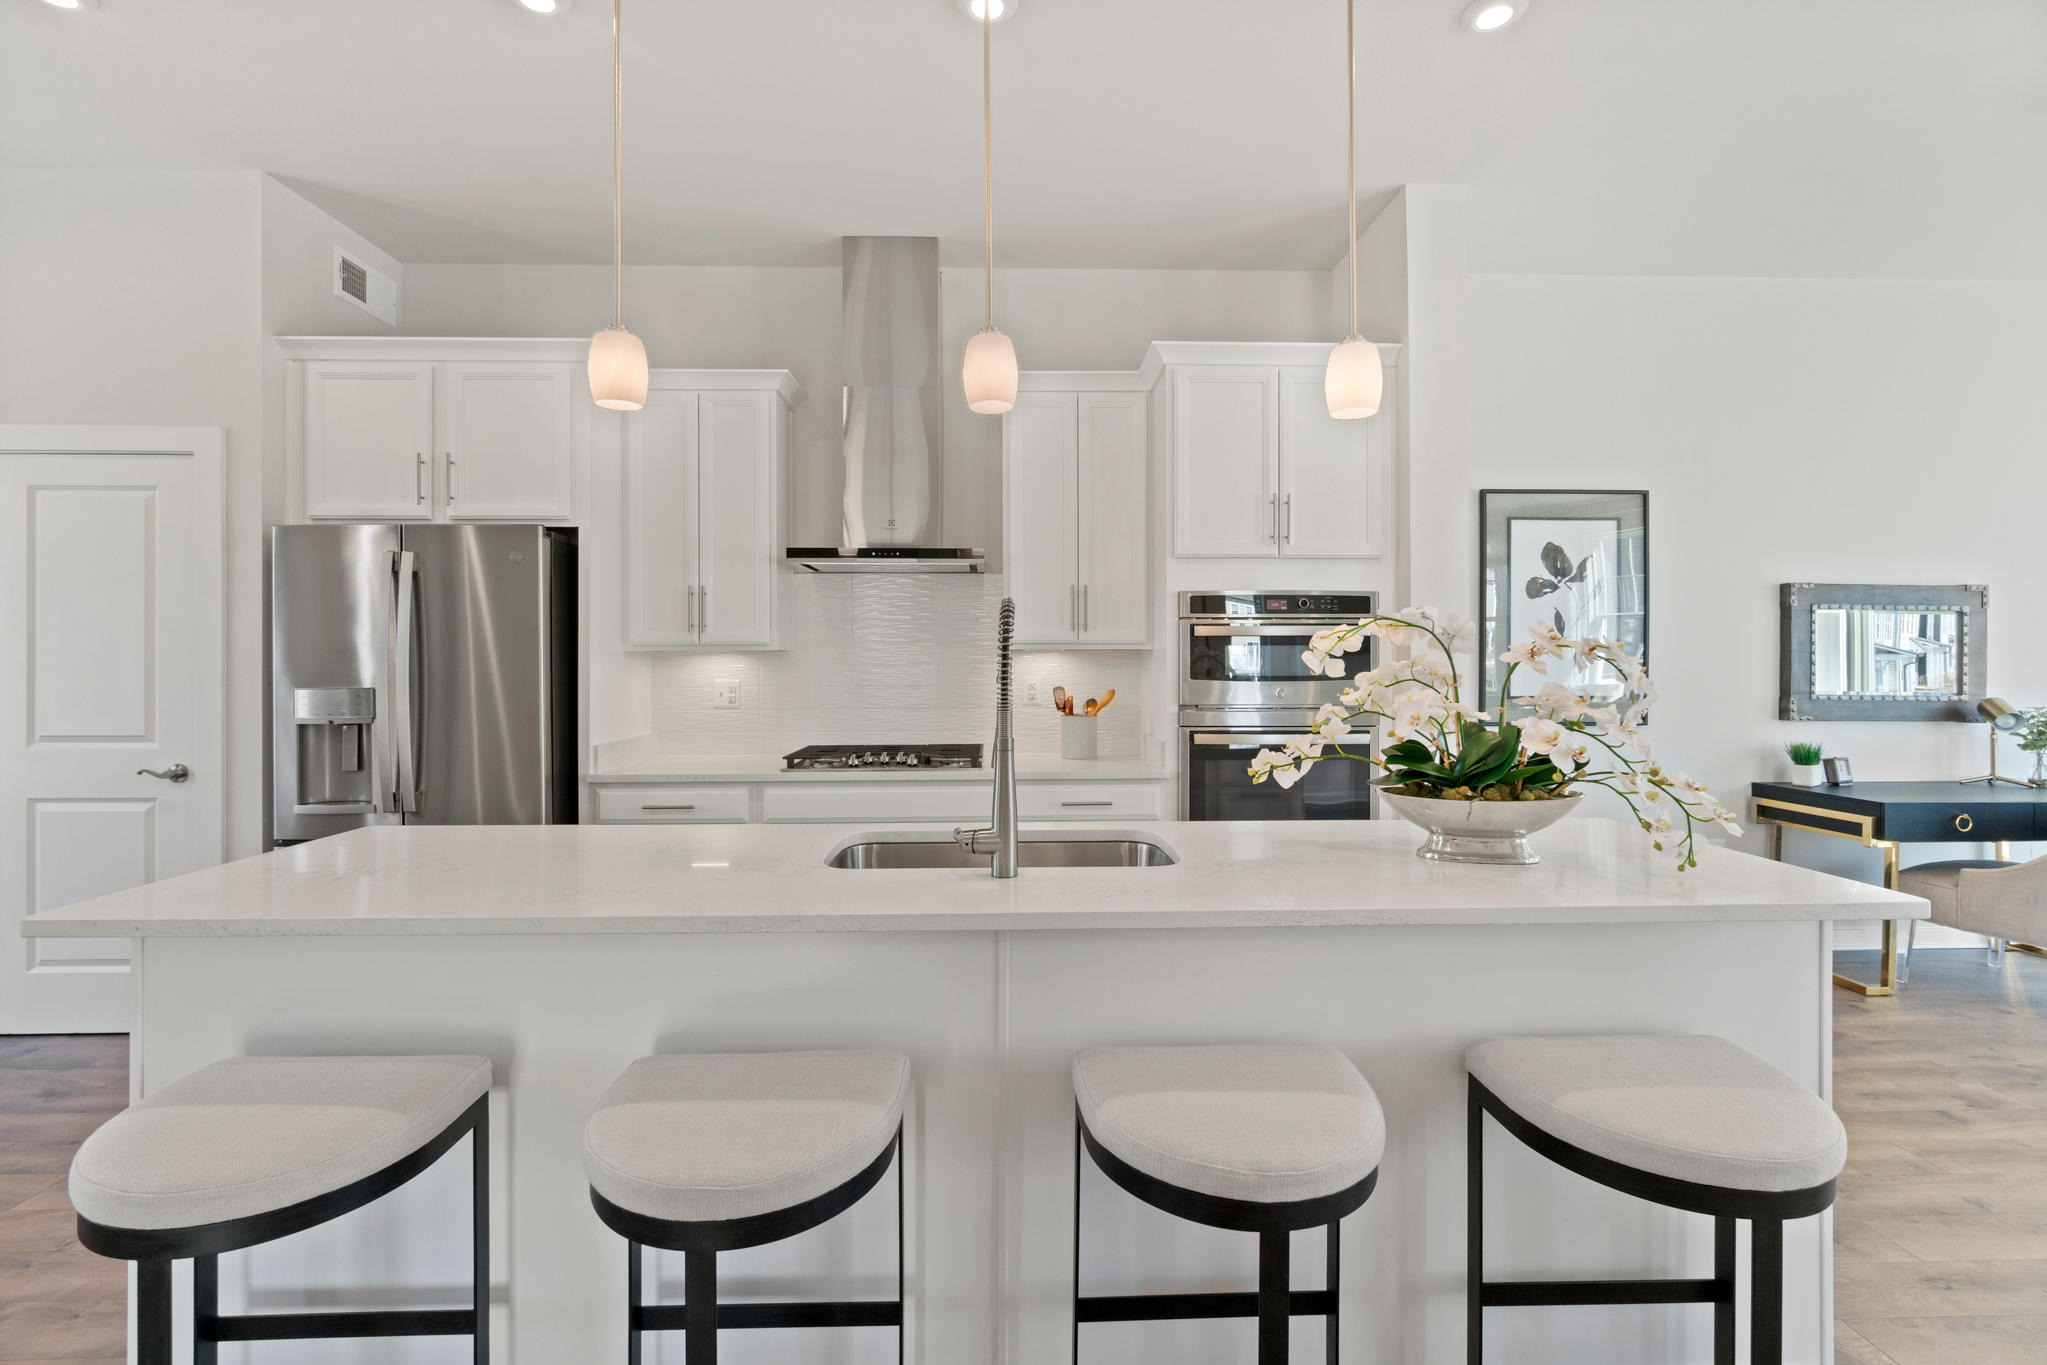 Chef-inspired kitchens with large island and ample seating